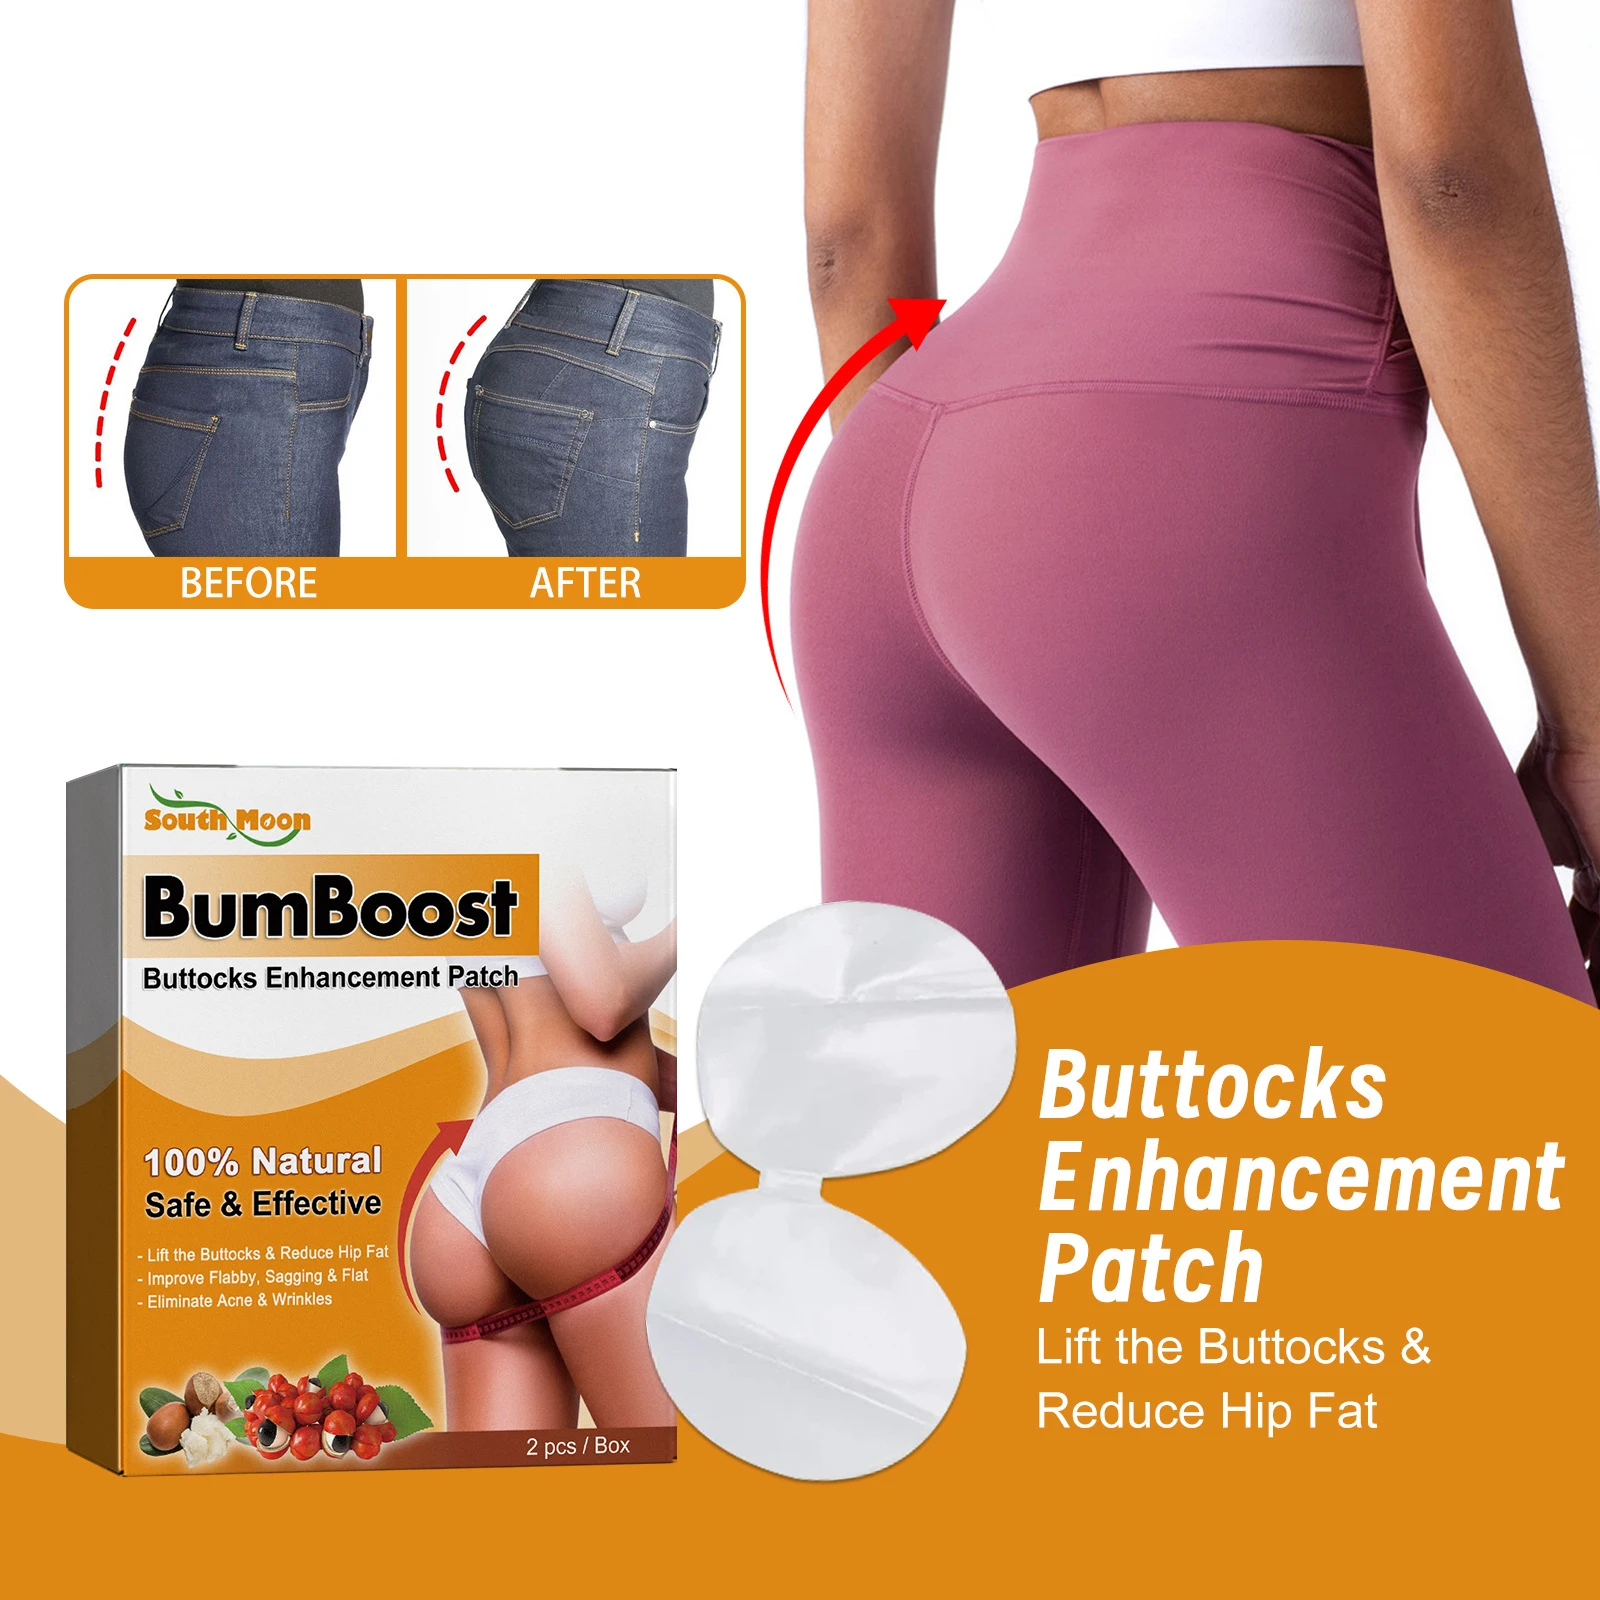 

Lift Buttock Patch Effective Lifting Firming Increase Elasticity Buttocks Curve Hip Up Butt Enhancement Peach Buttocks Shaping